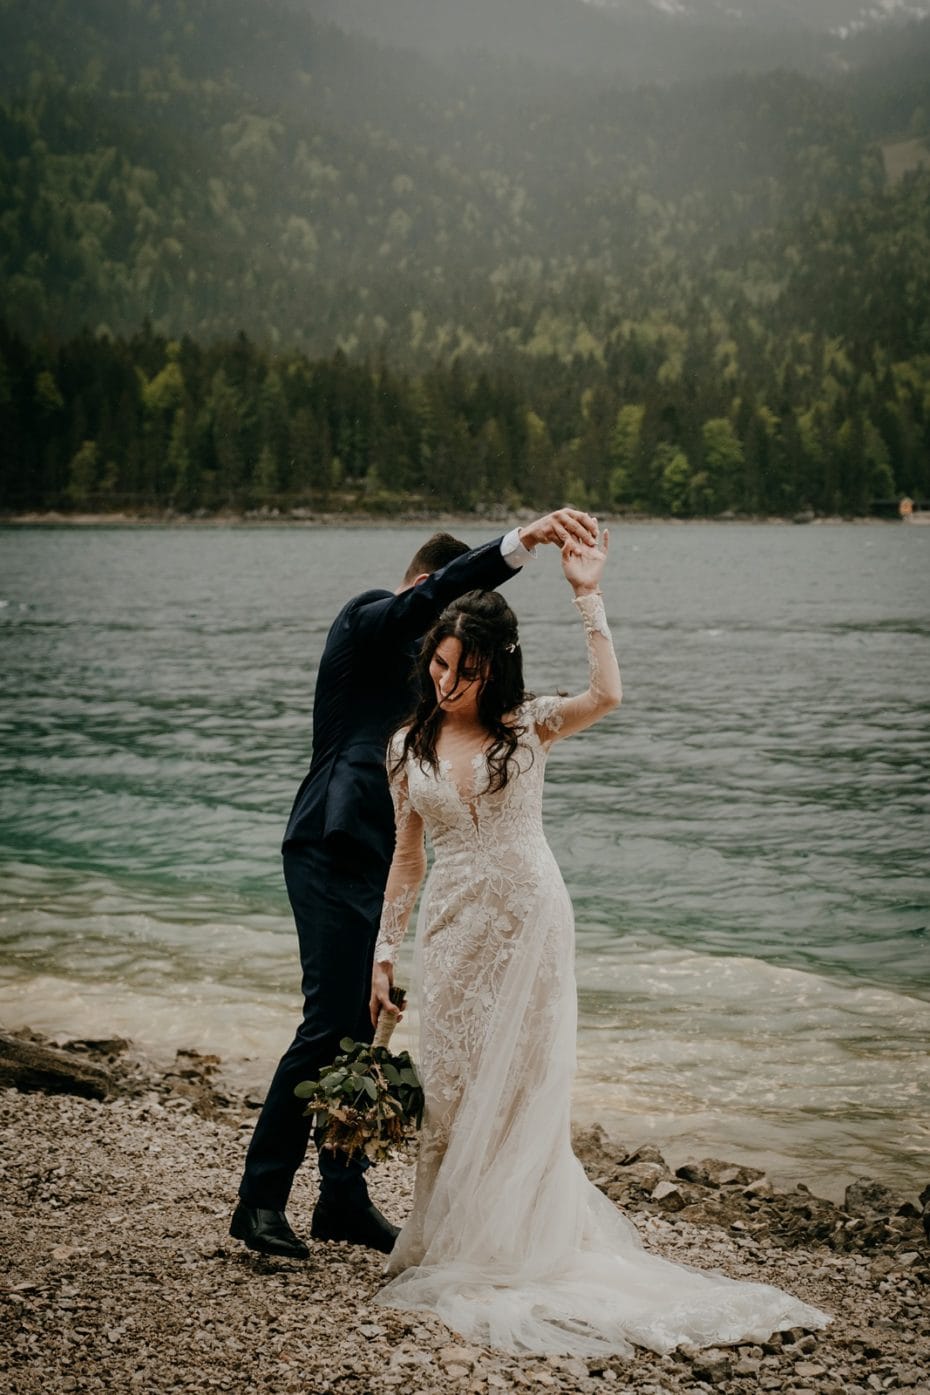 Bride and groom dance on the shore of lake Eibsee in the rain